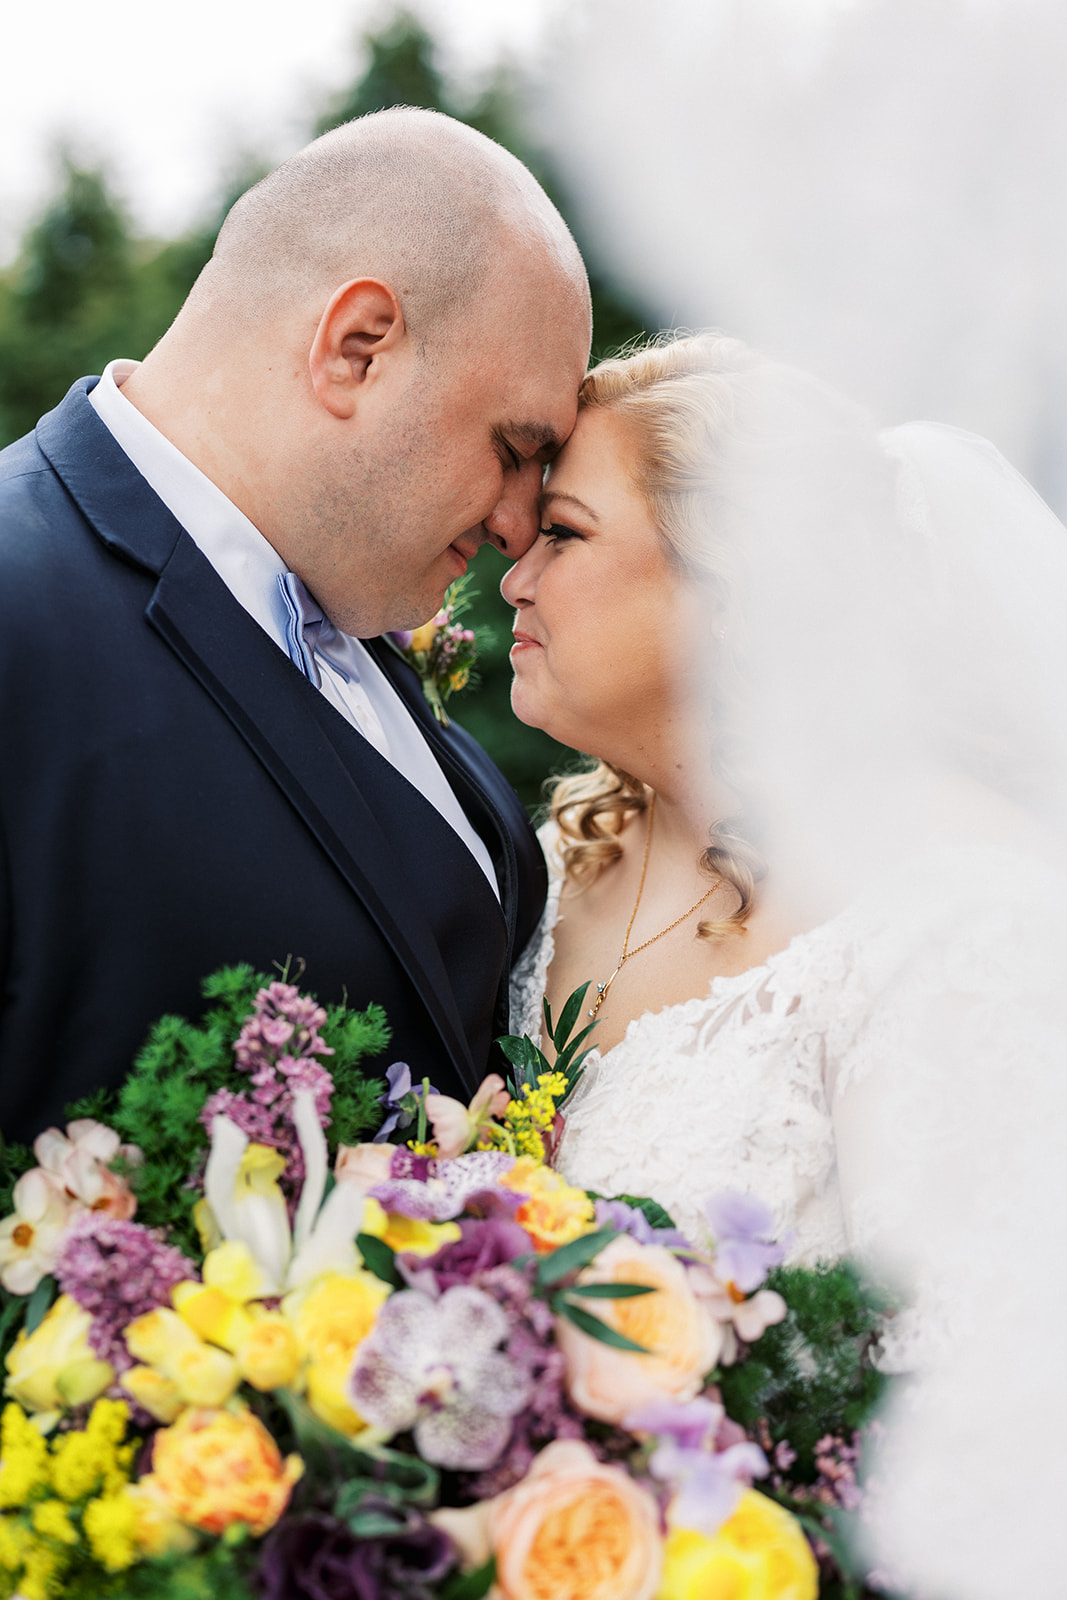 Newlyweds touch foreheads while standing in a garden holding a large colorful bouquet at their Forest Lodge Wedding